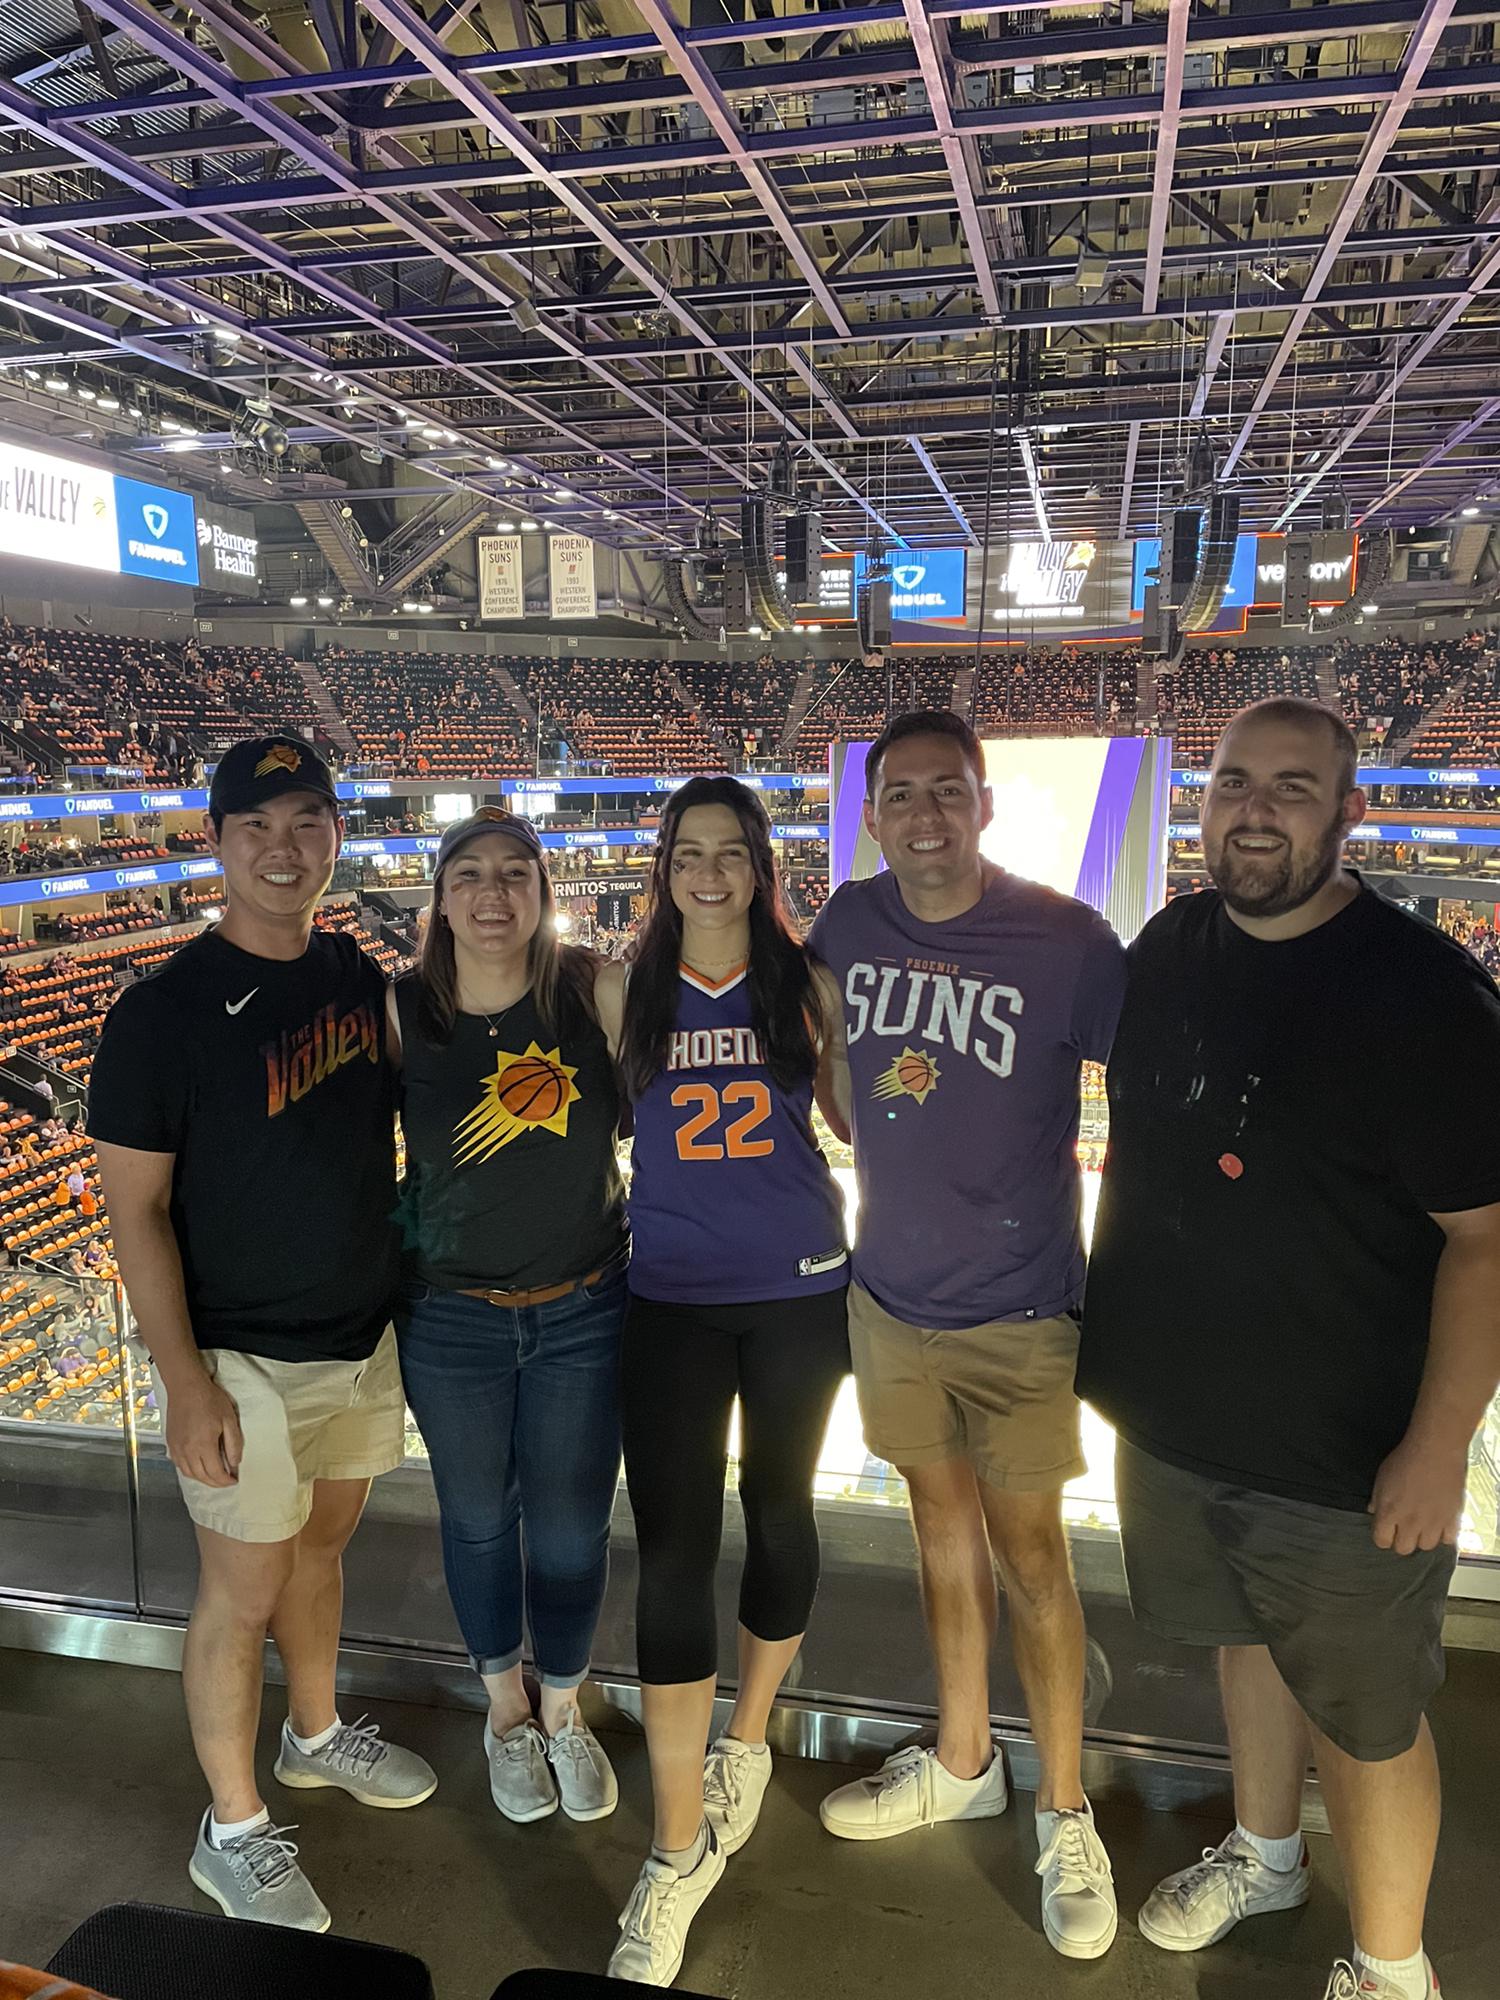 Jon, Vince, Marissa, Chelsea and Justin at a Suns game in 2021